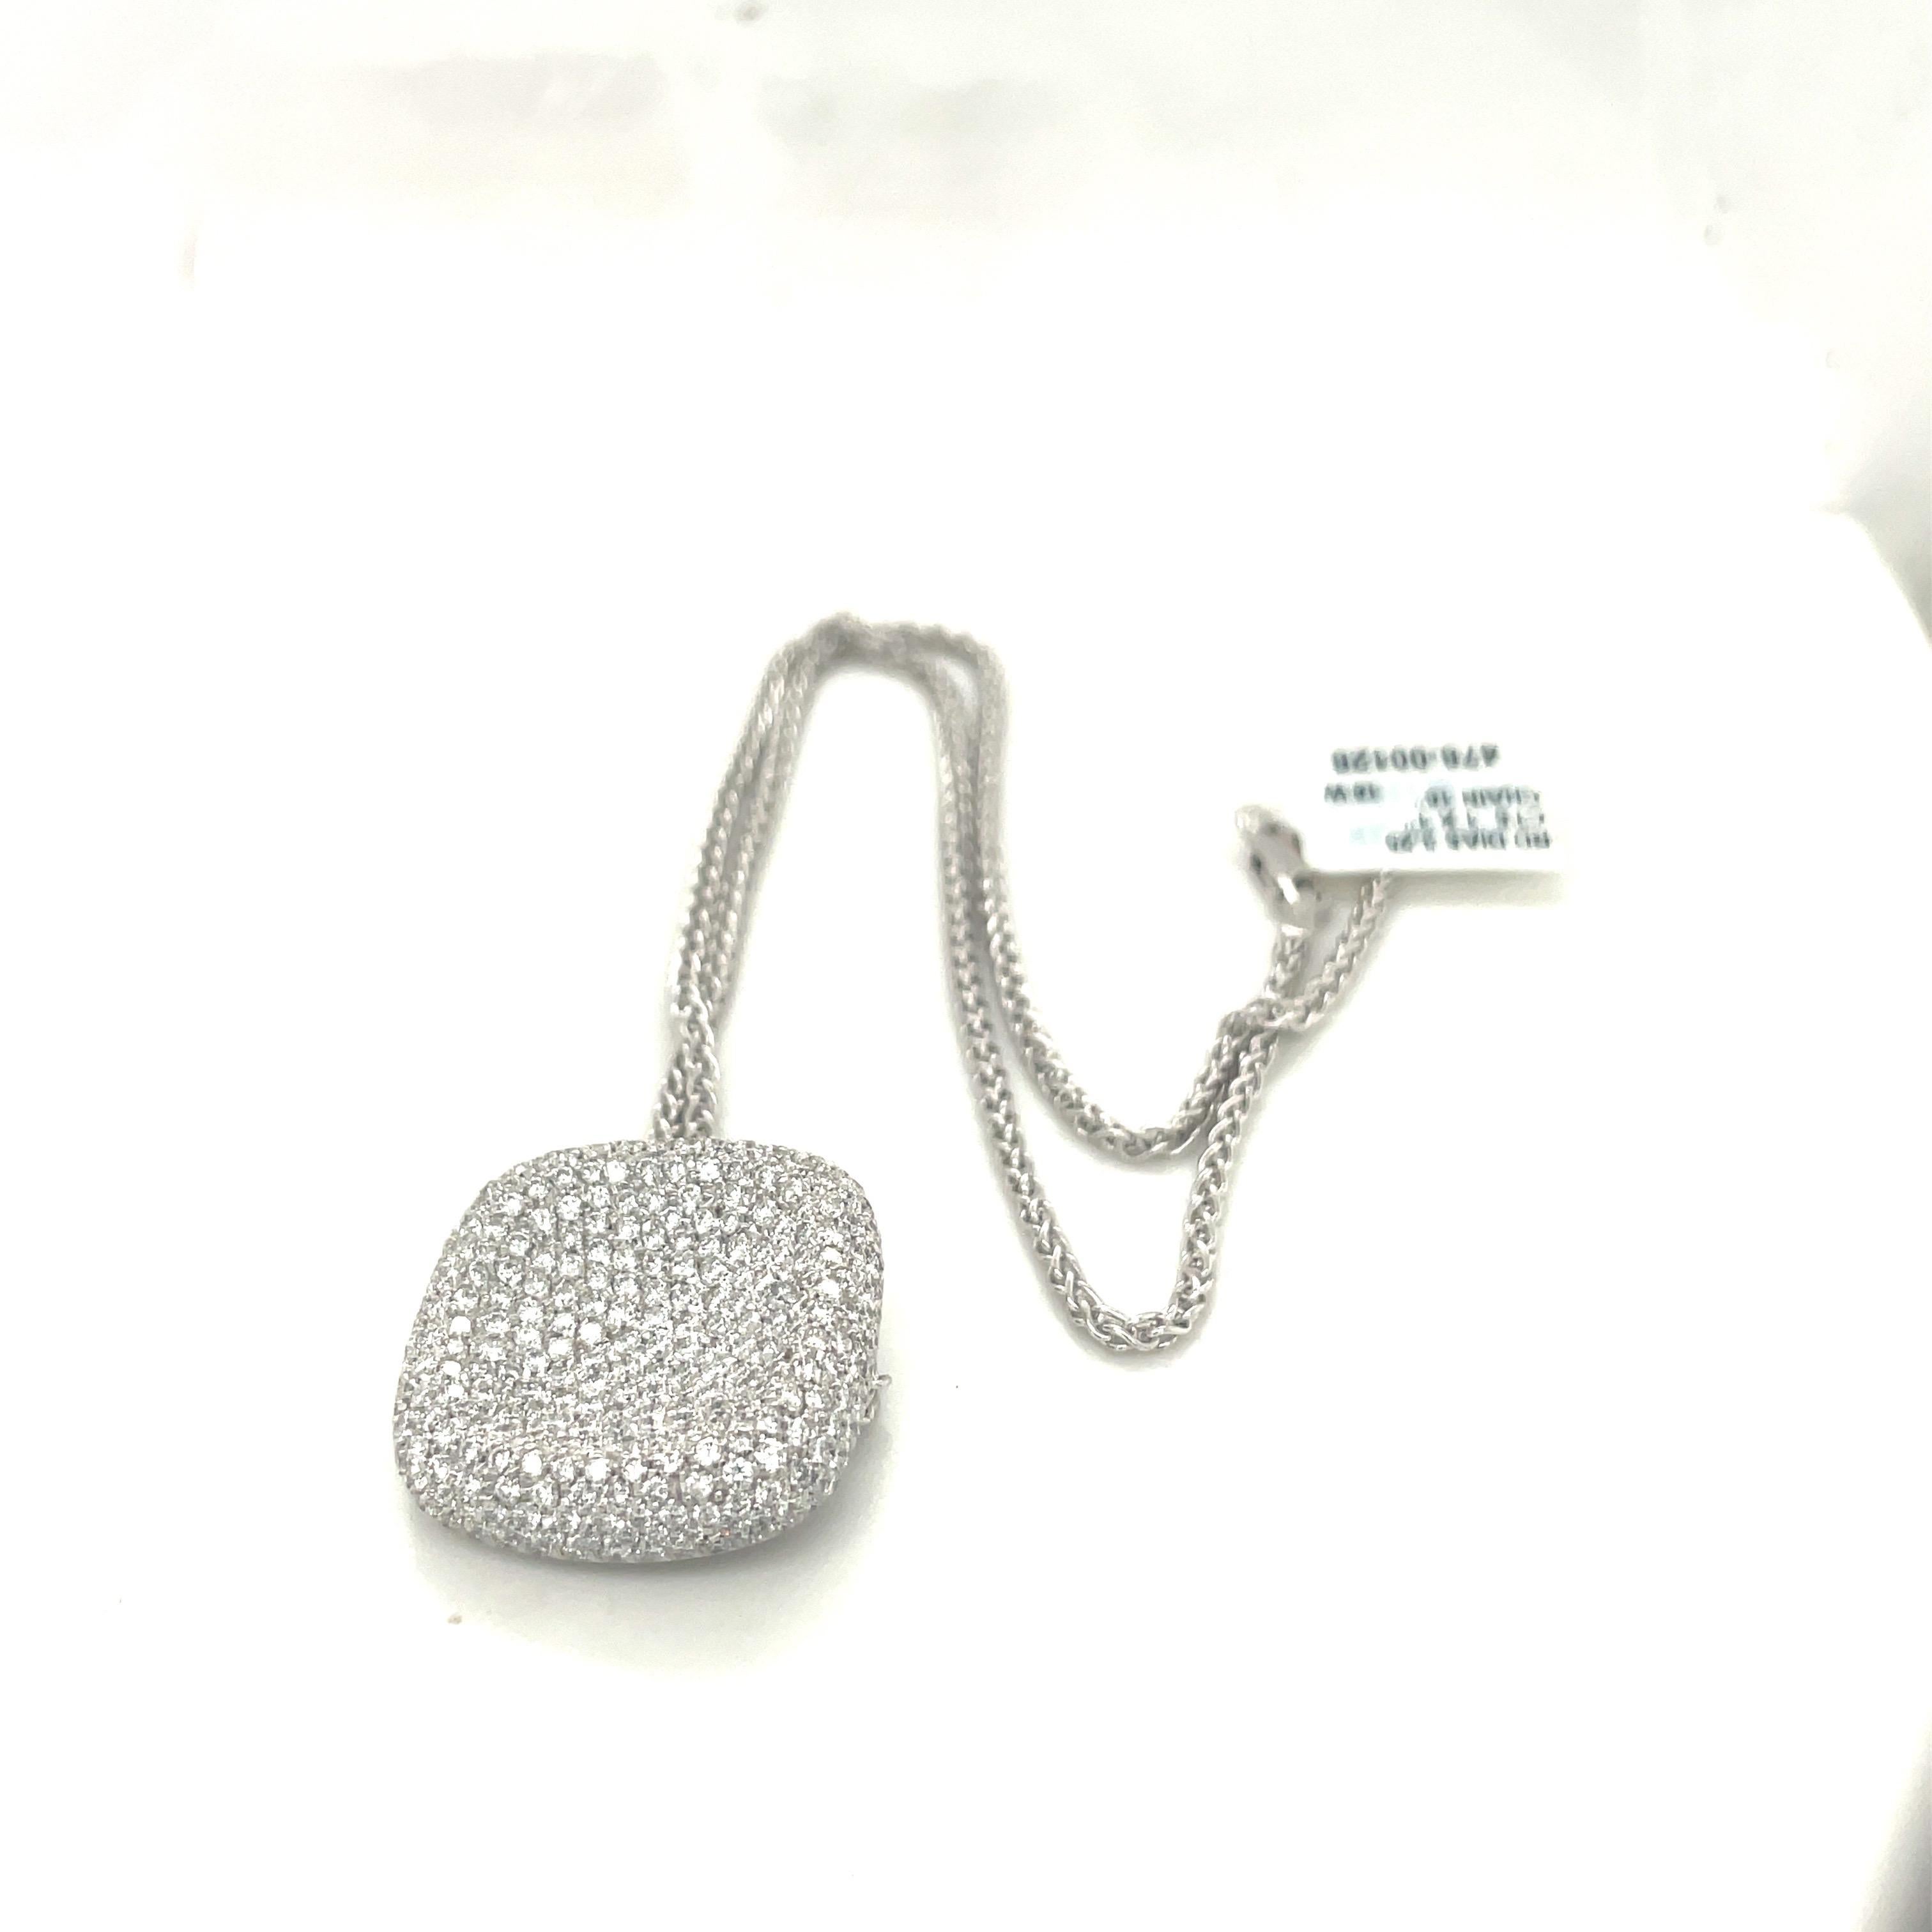 This 18 karat white gold and diamond pendant is designed in a cushion shape, which has been beautifully pave set with 3.25 carats of diamonds. The cushion shaped pendant is convex, giving it an added dimension. The 1'